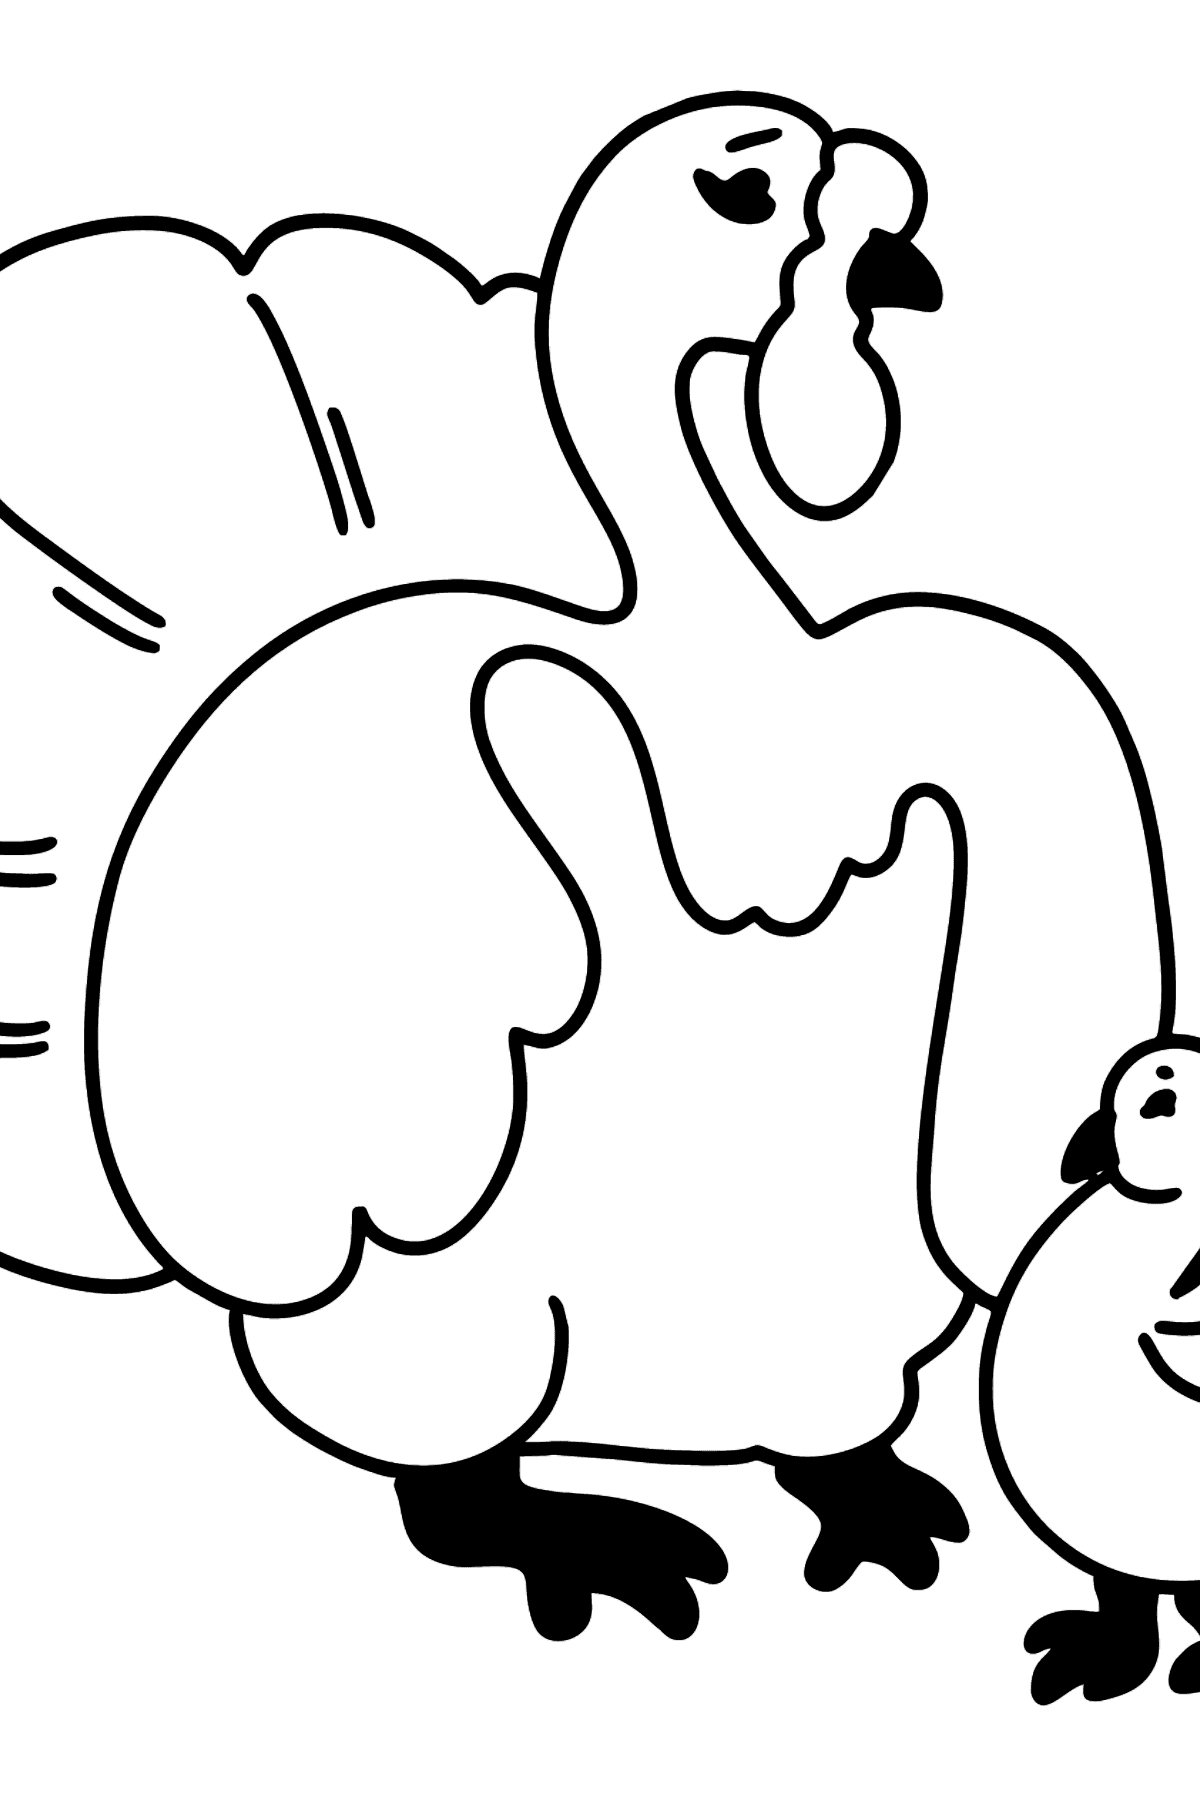 Turkey coloring page - Coloring Pages for Kids